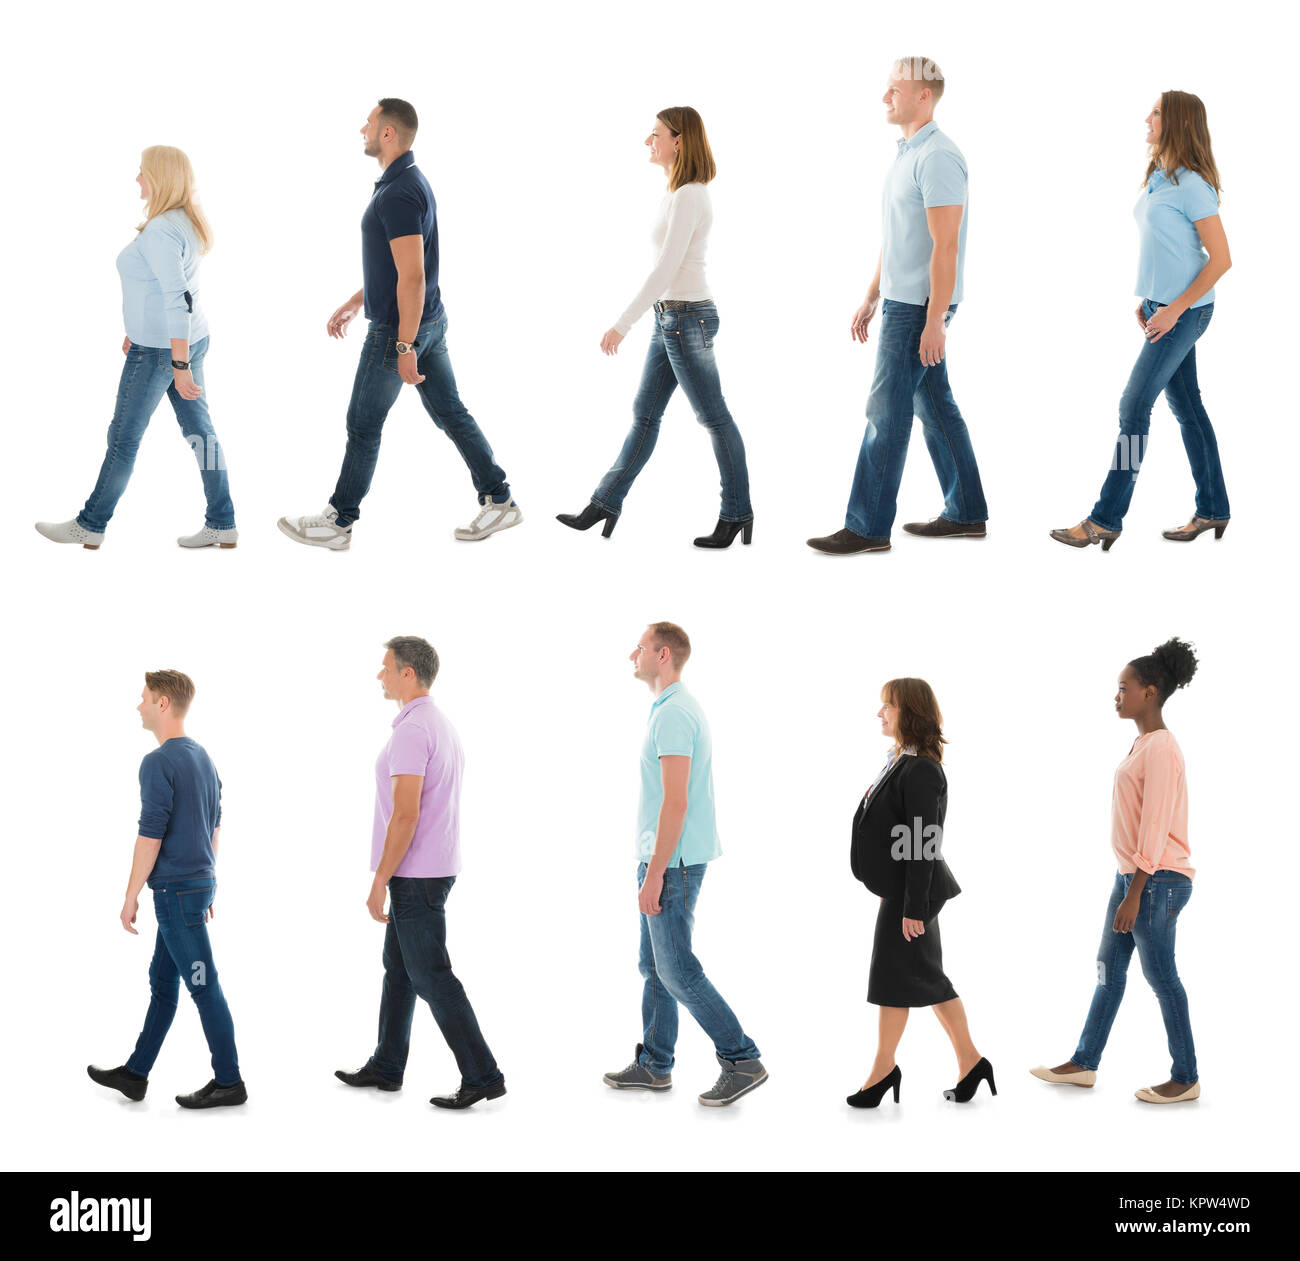 Group Of People Walking In Line Stock Photo